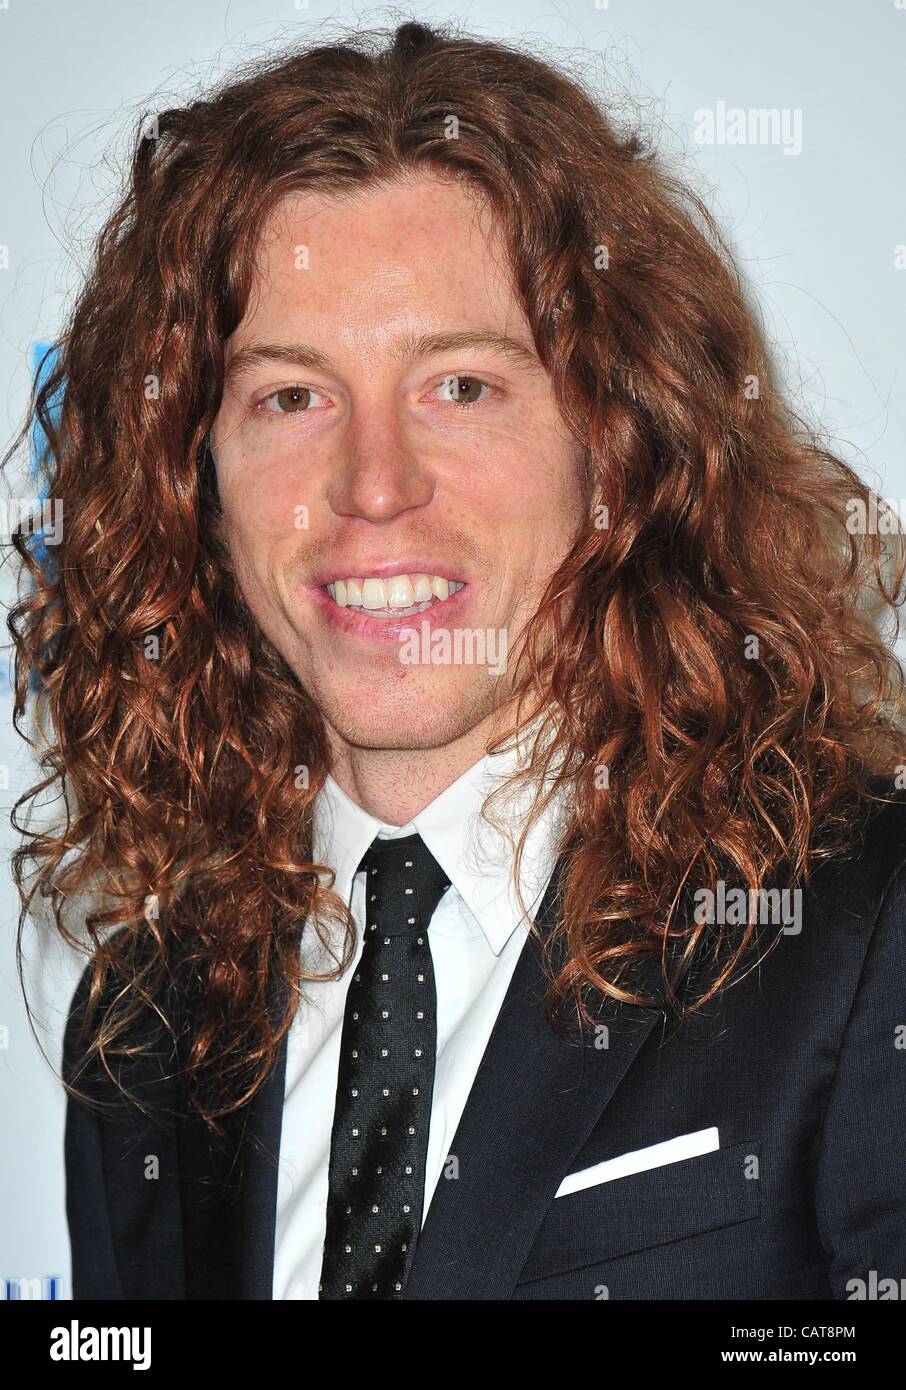 In Pictures: Shaun White Shows His Fashion-Forward Sensibilities – Robb  Report